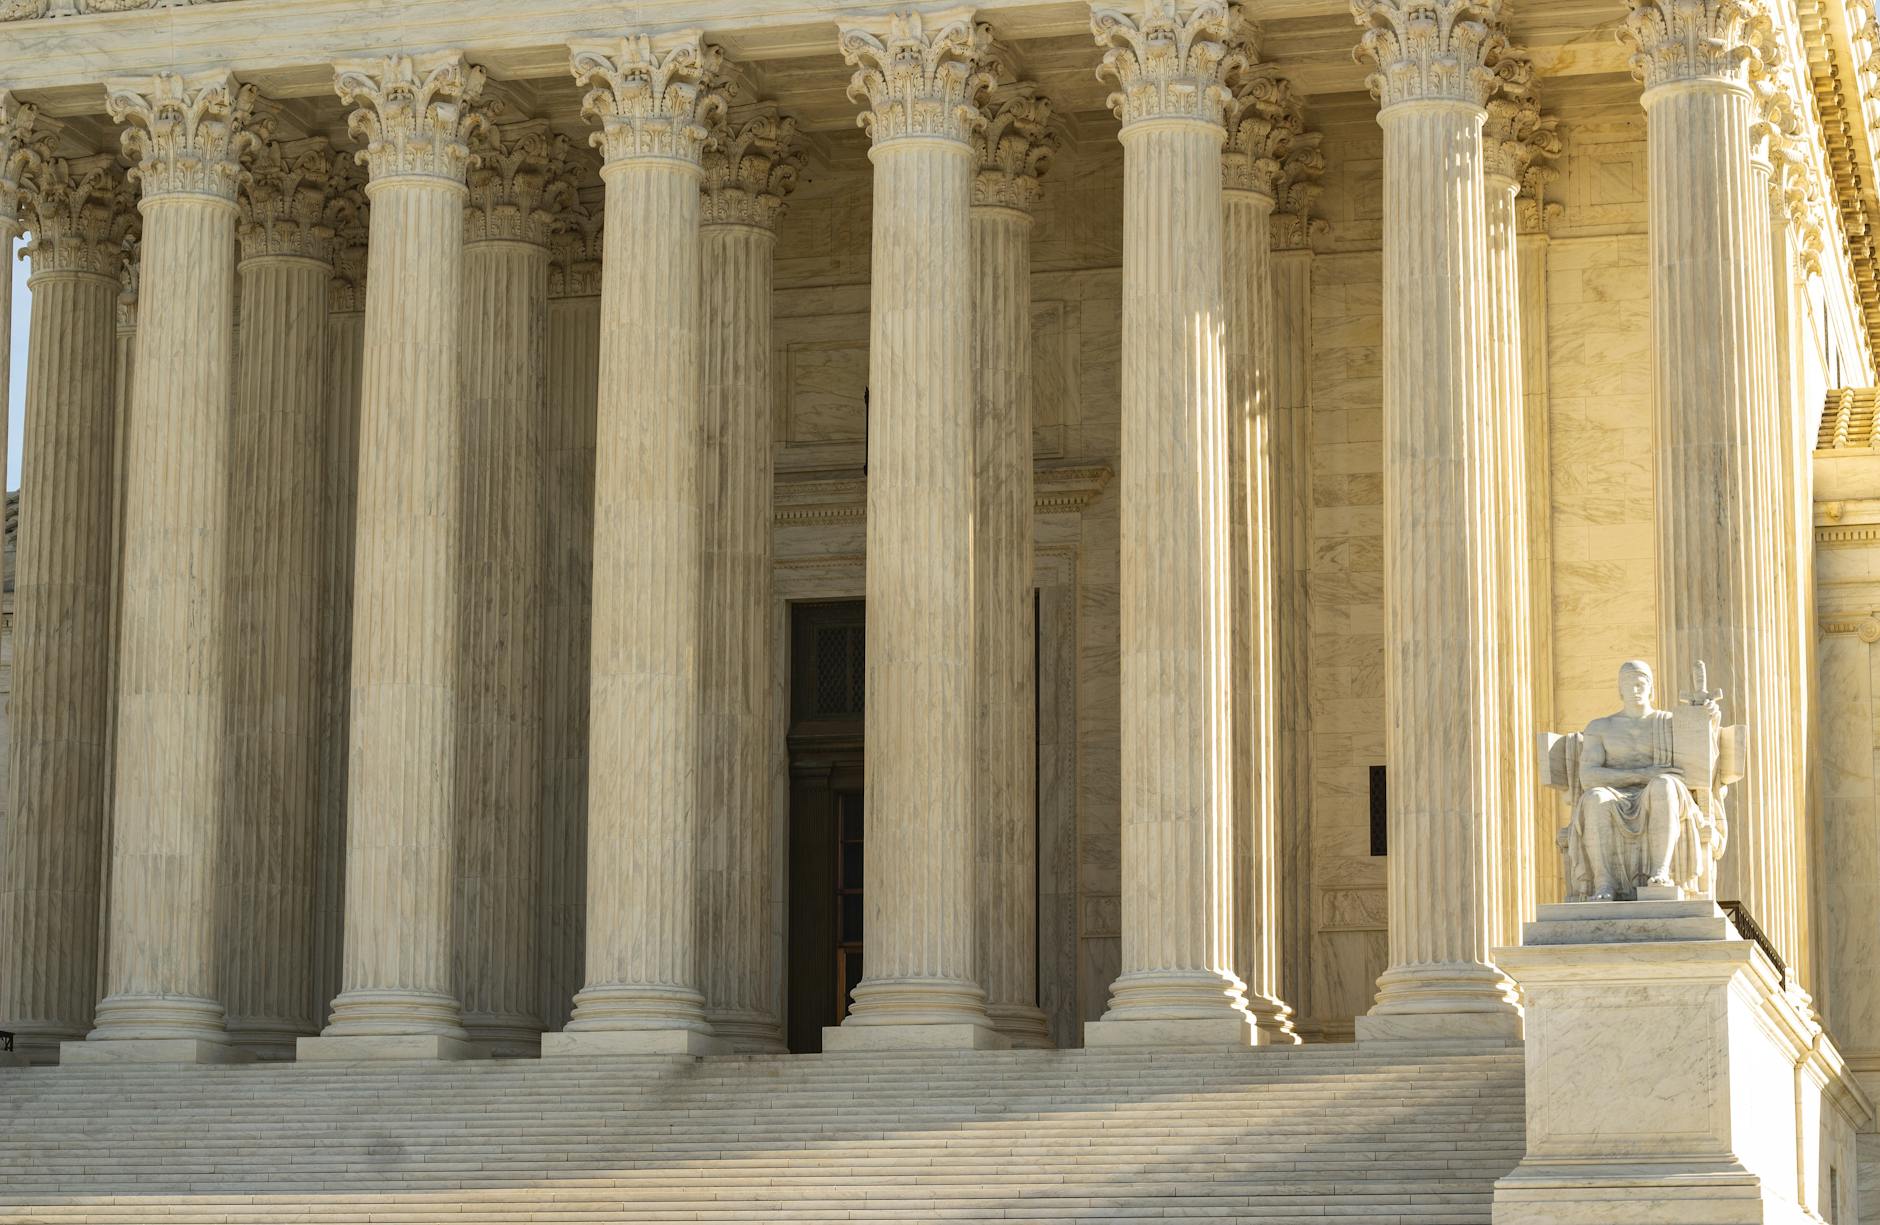 Supreme Court of the United States (Photo Leandro Paes)